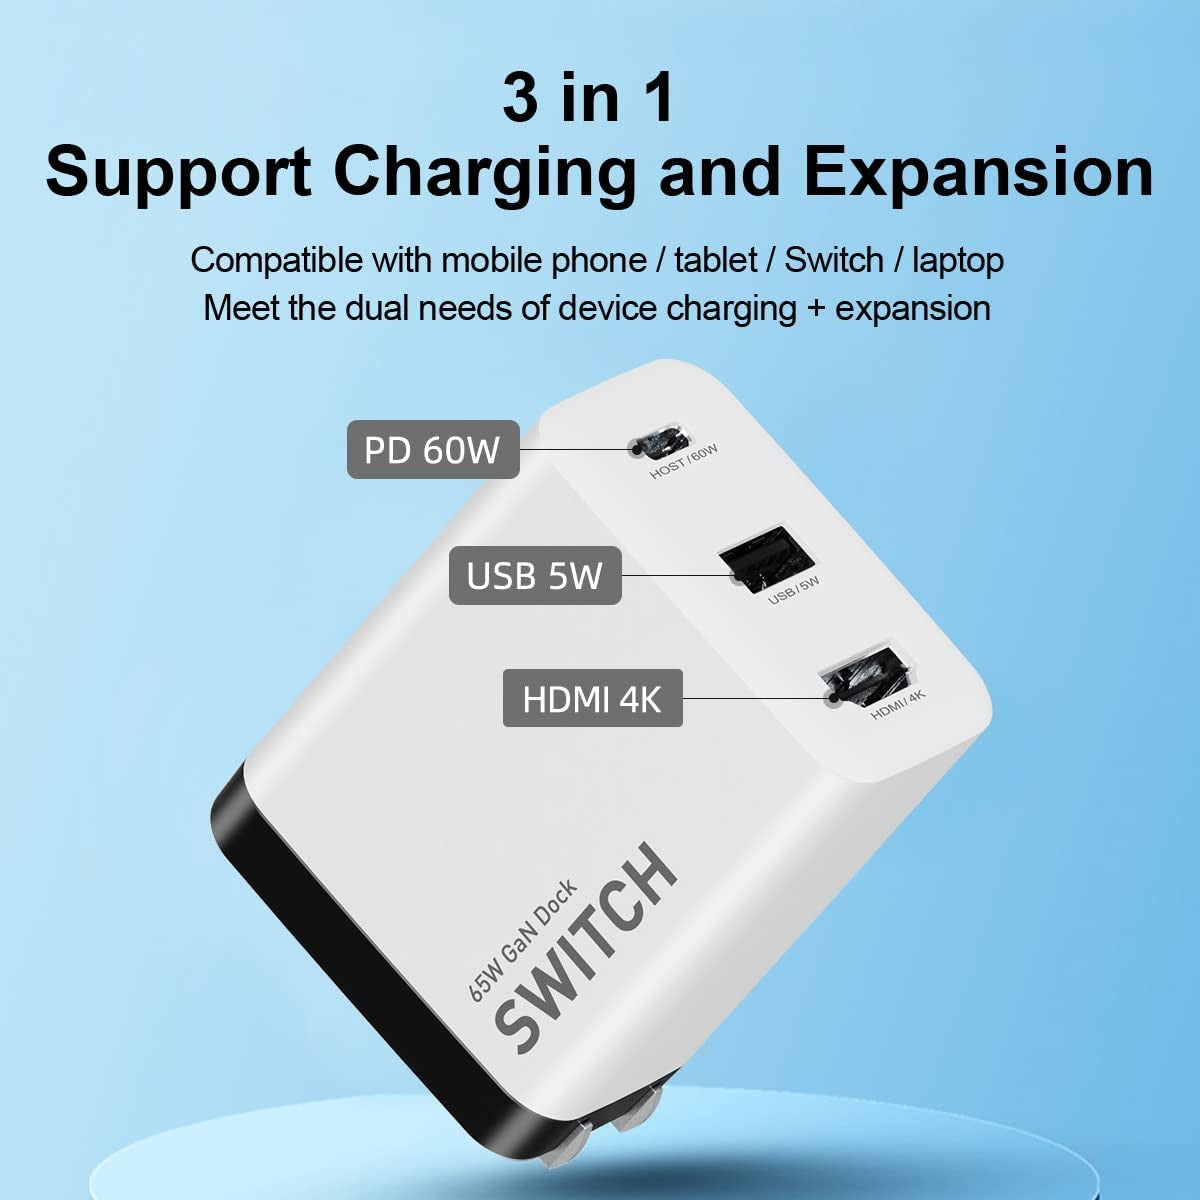 Switch Dock Charger for Nintendo Switch/OLED, Portable TV Docking Station  for Nintendo Switch 4K HDMI/USB3.0/PD USB-C Fast Charging Ports, Portable